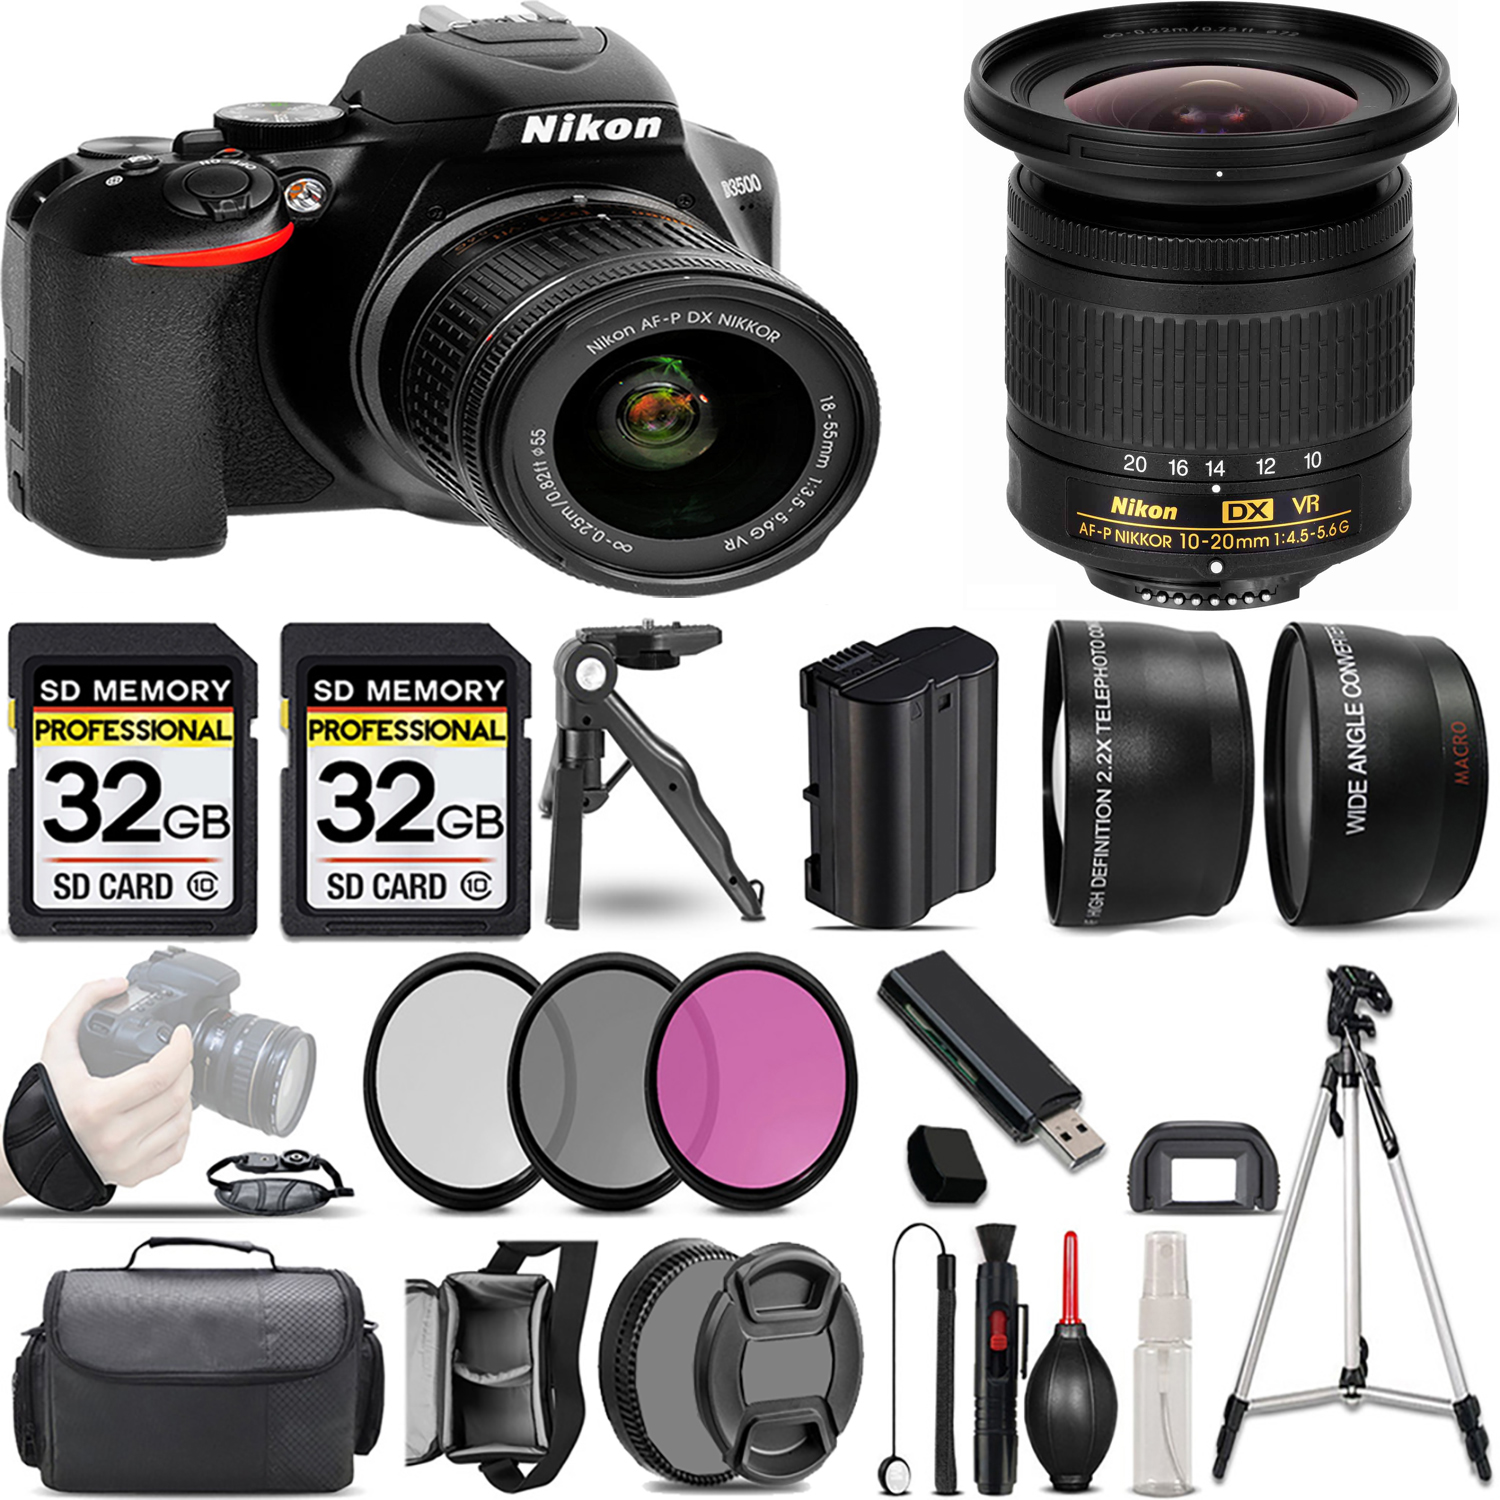 D3500 DSLR Camera with 18-55mm Lens + 10-20mm Lens + 3 Piece Filter Set + 64GB *FREE SHIPPING*